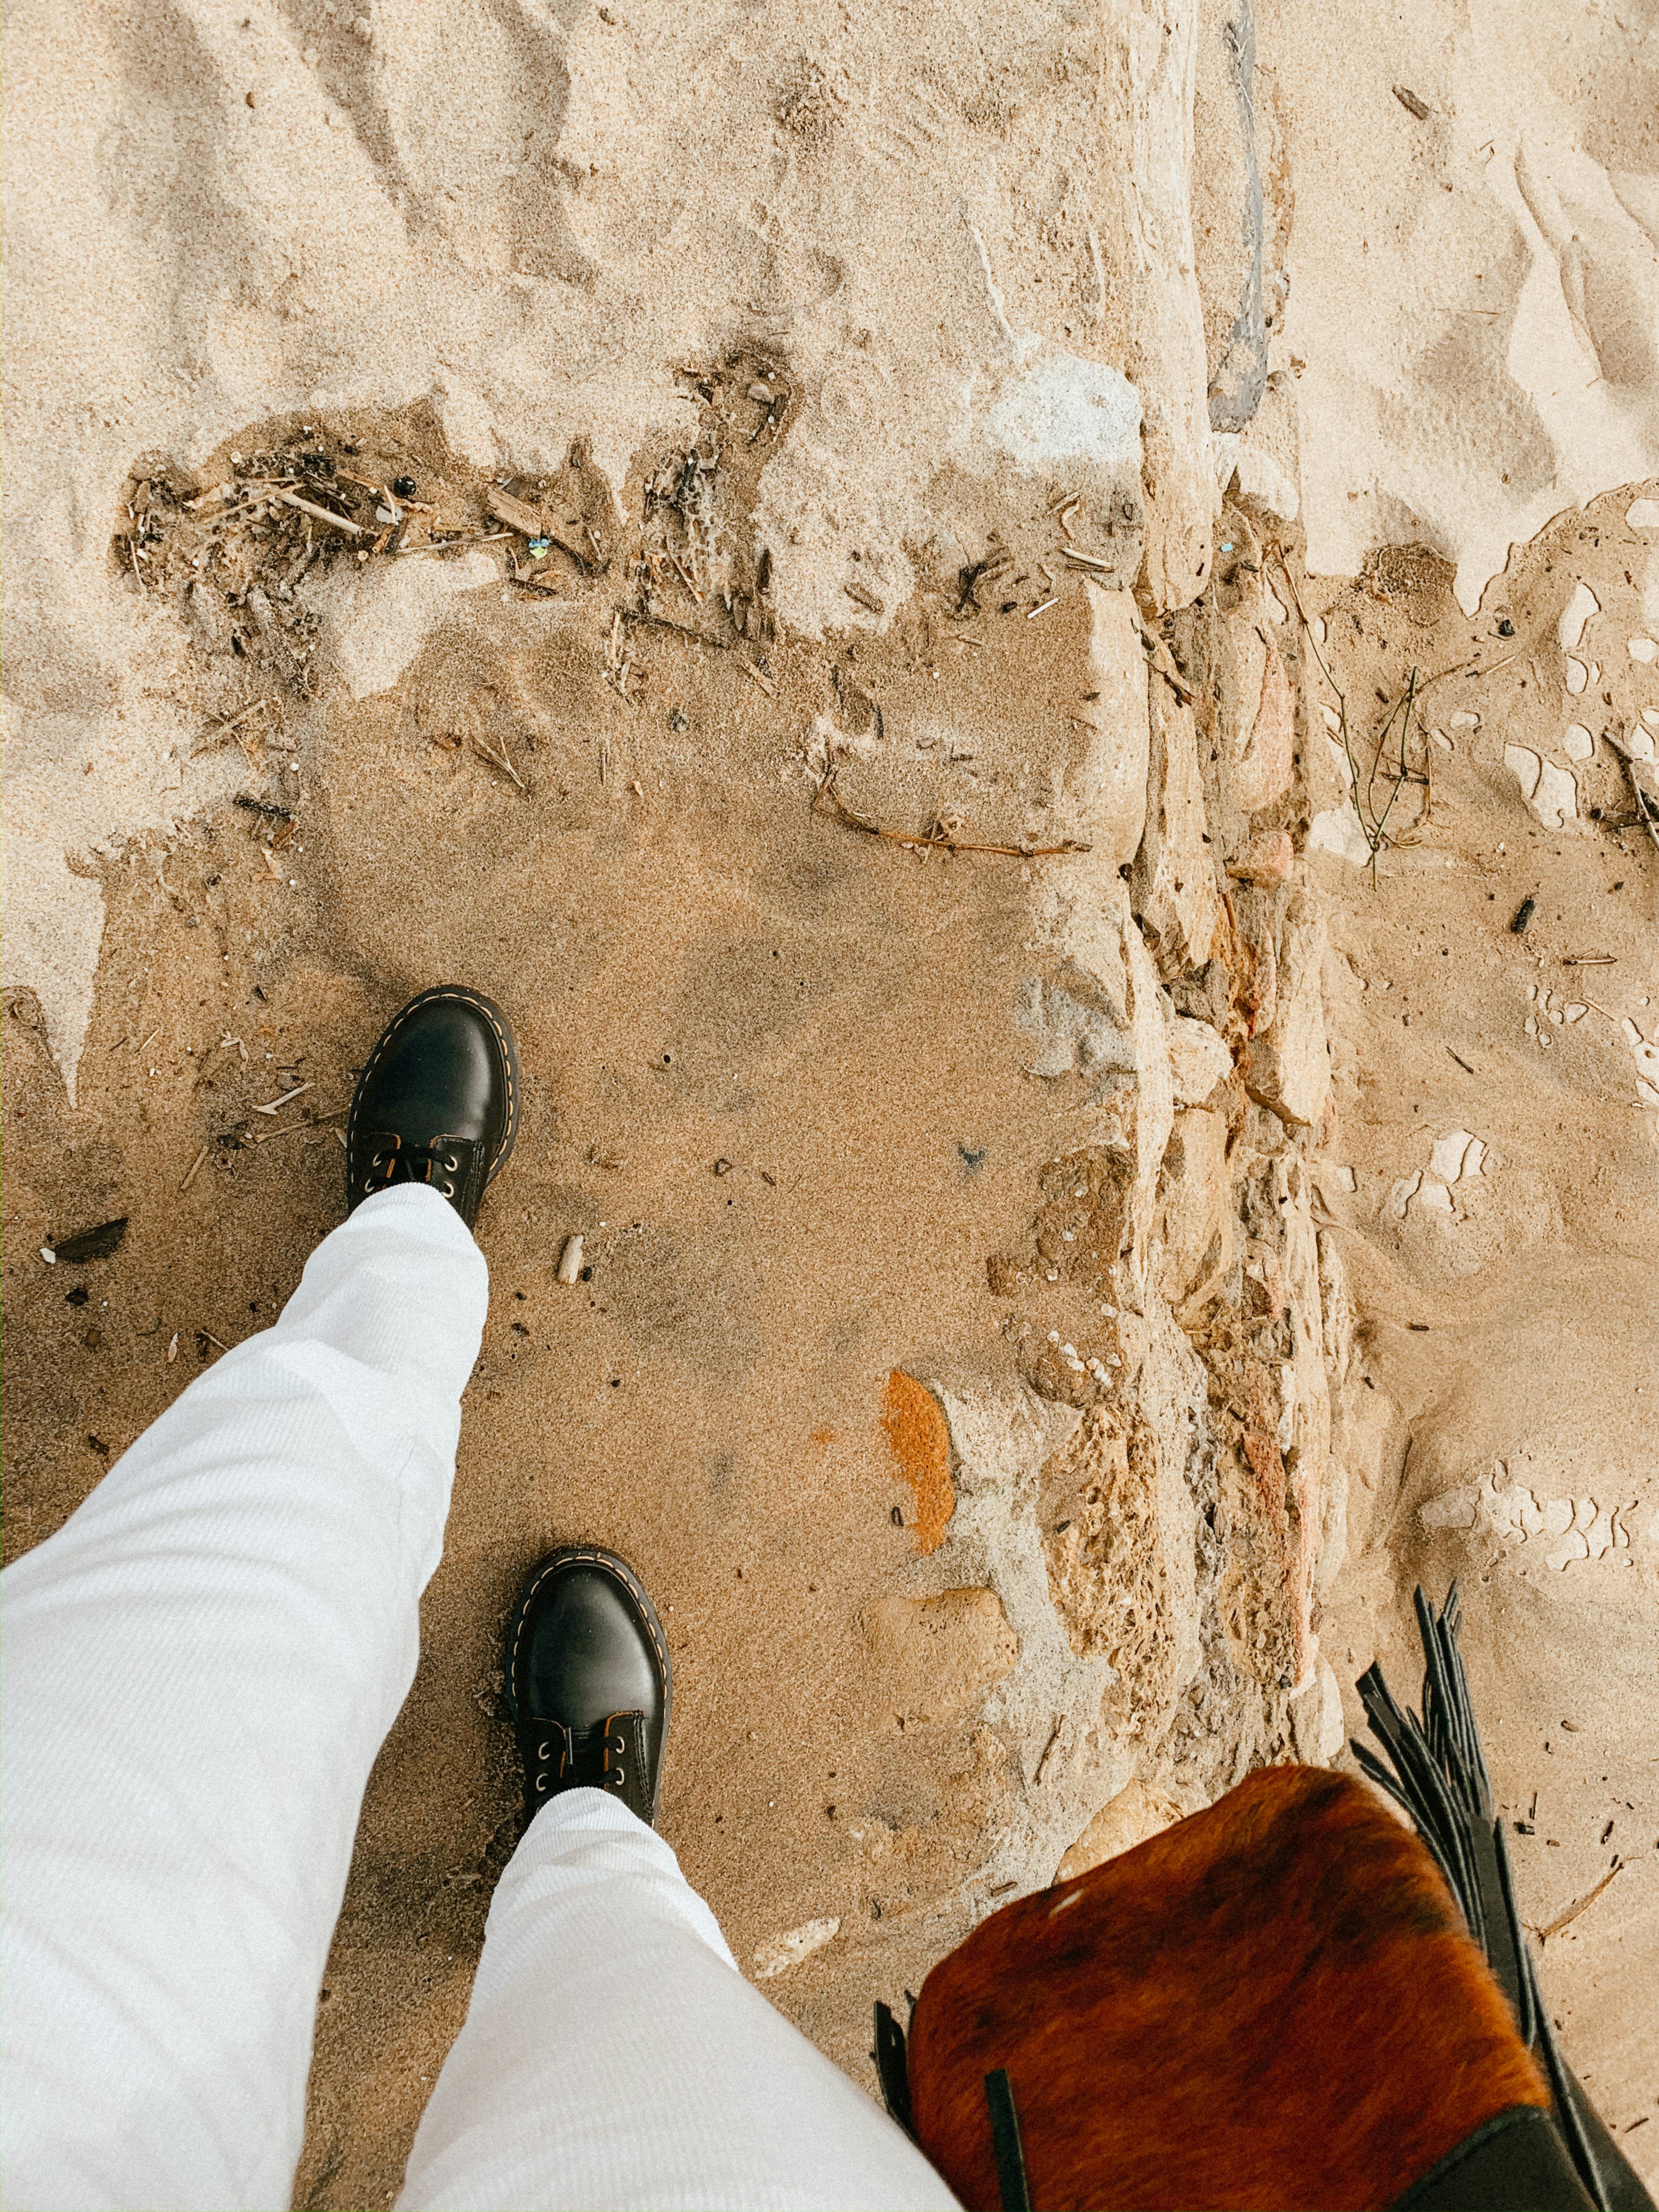 person in white pants and black leather shoes standing on brown sand